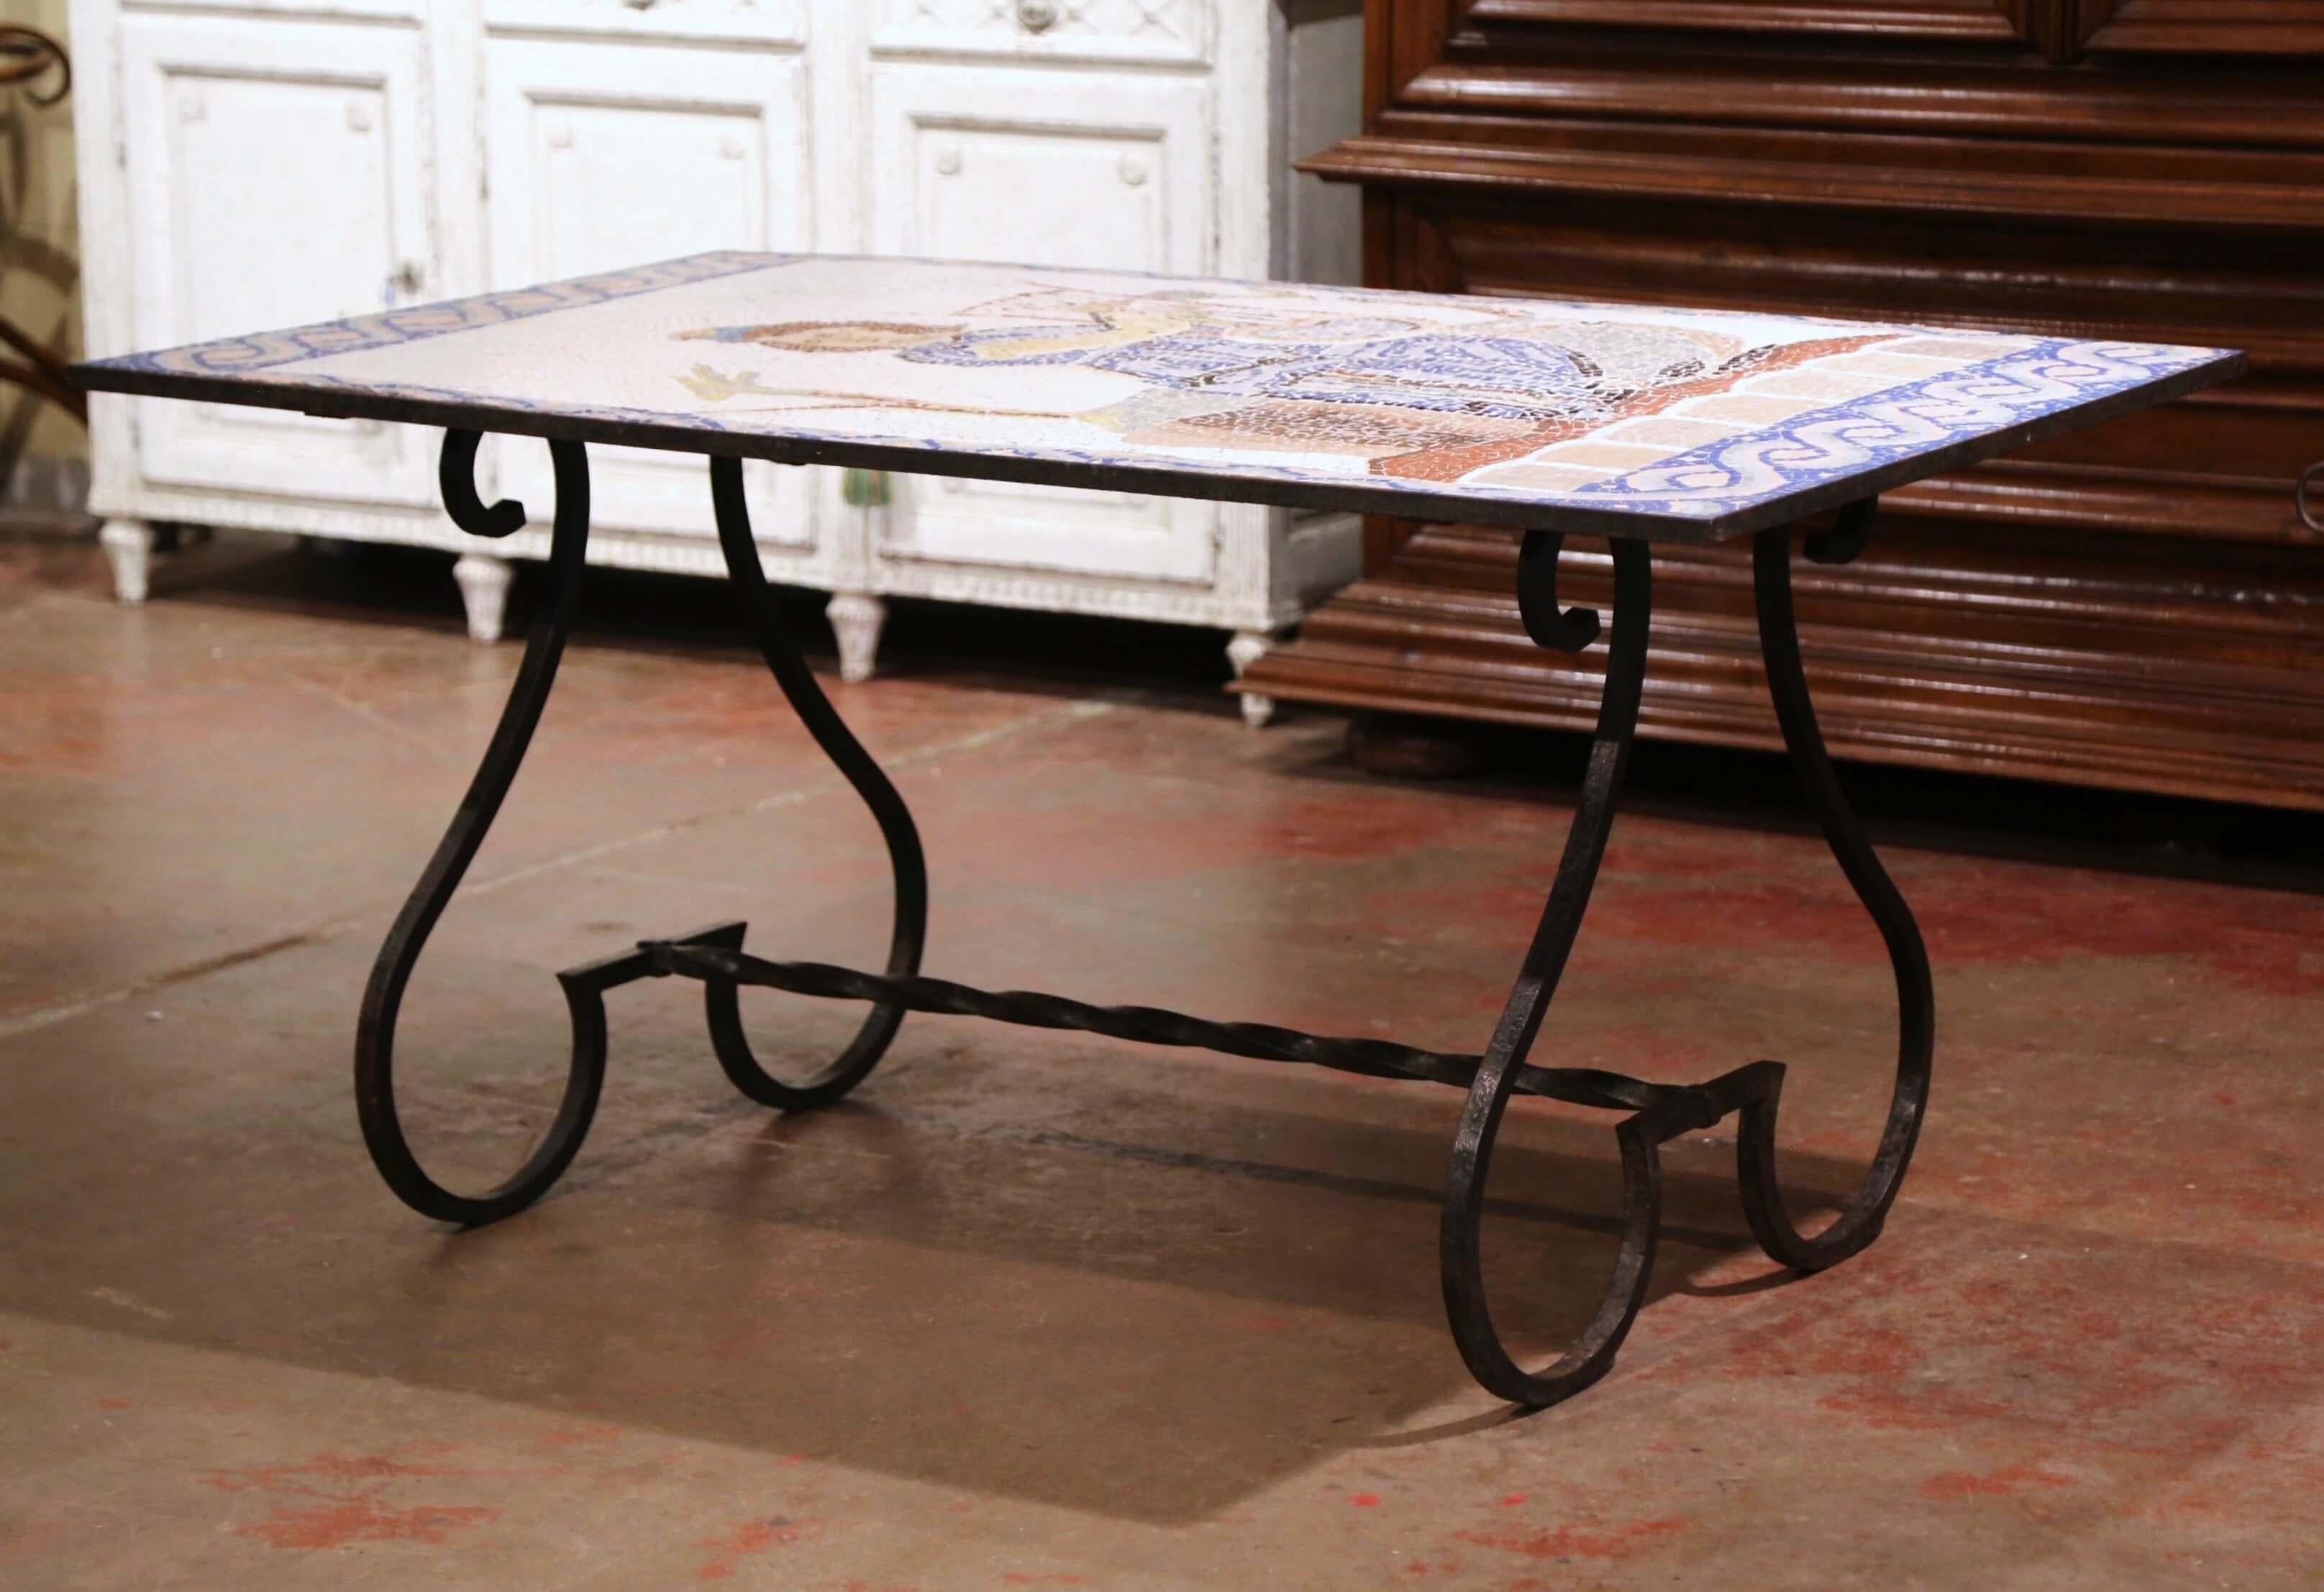 Forged 19th Century French Wrought Iron Outdoor Table with Ceramic Mosaic Top